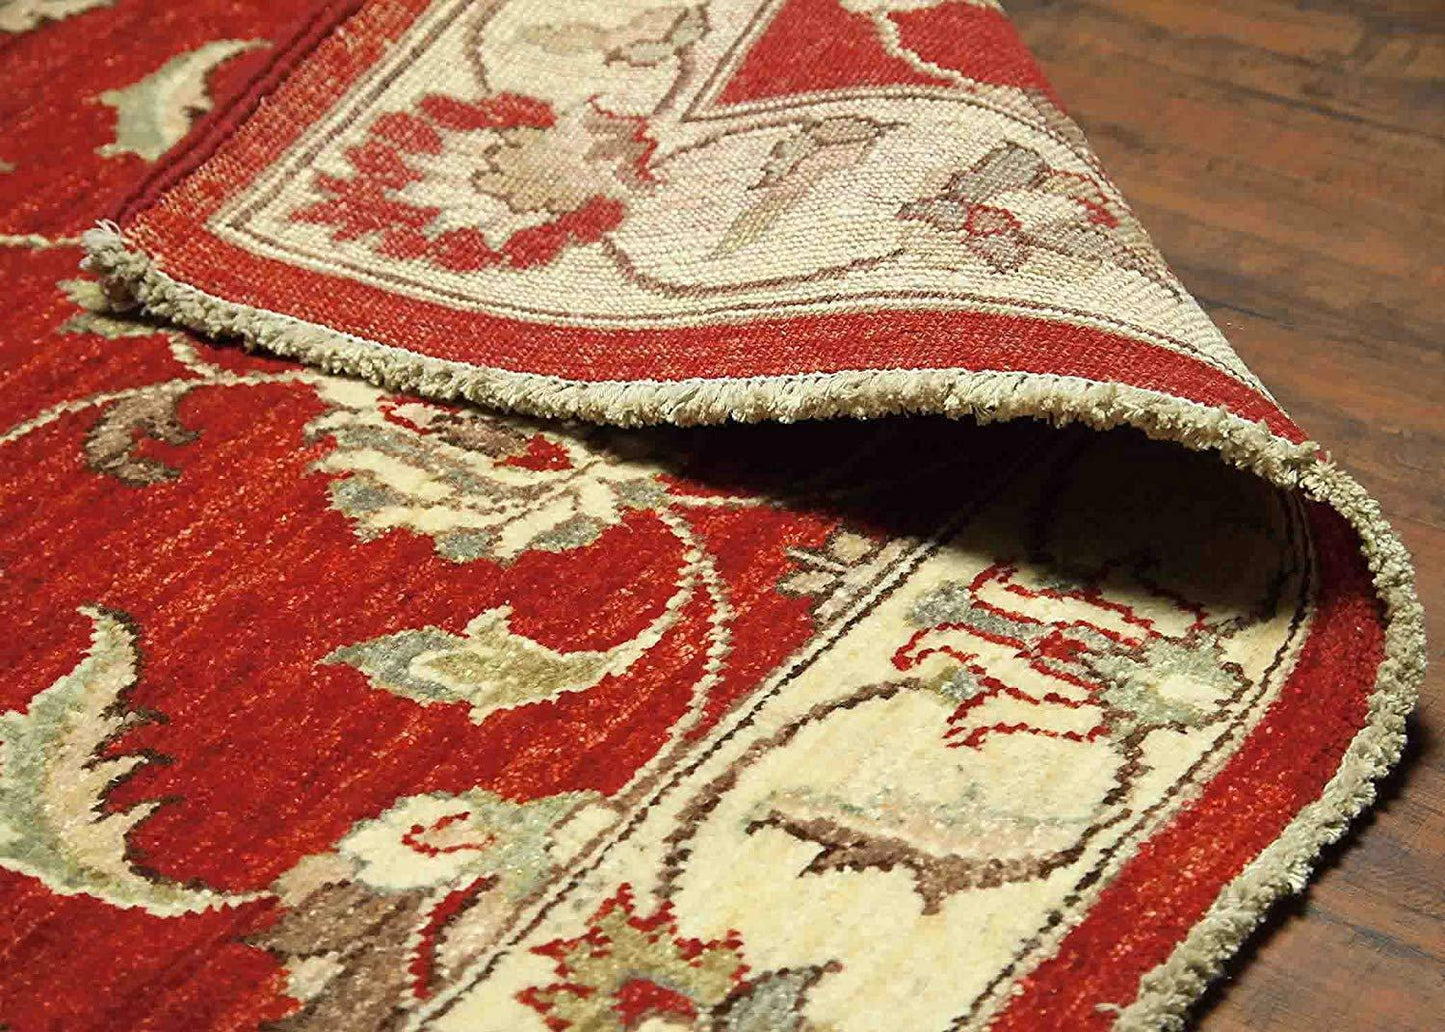 Traditional Hand-Knotted Oriental Chobi Area Rugs Red/Beige 100% Wool Rugs(3 x 5) 3x5